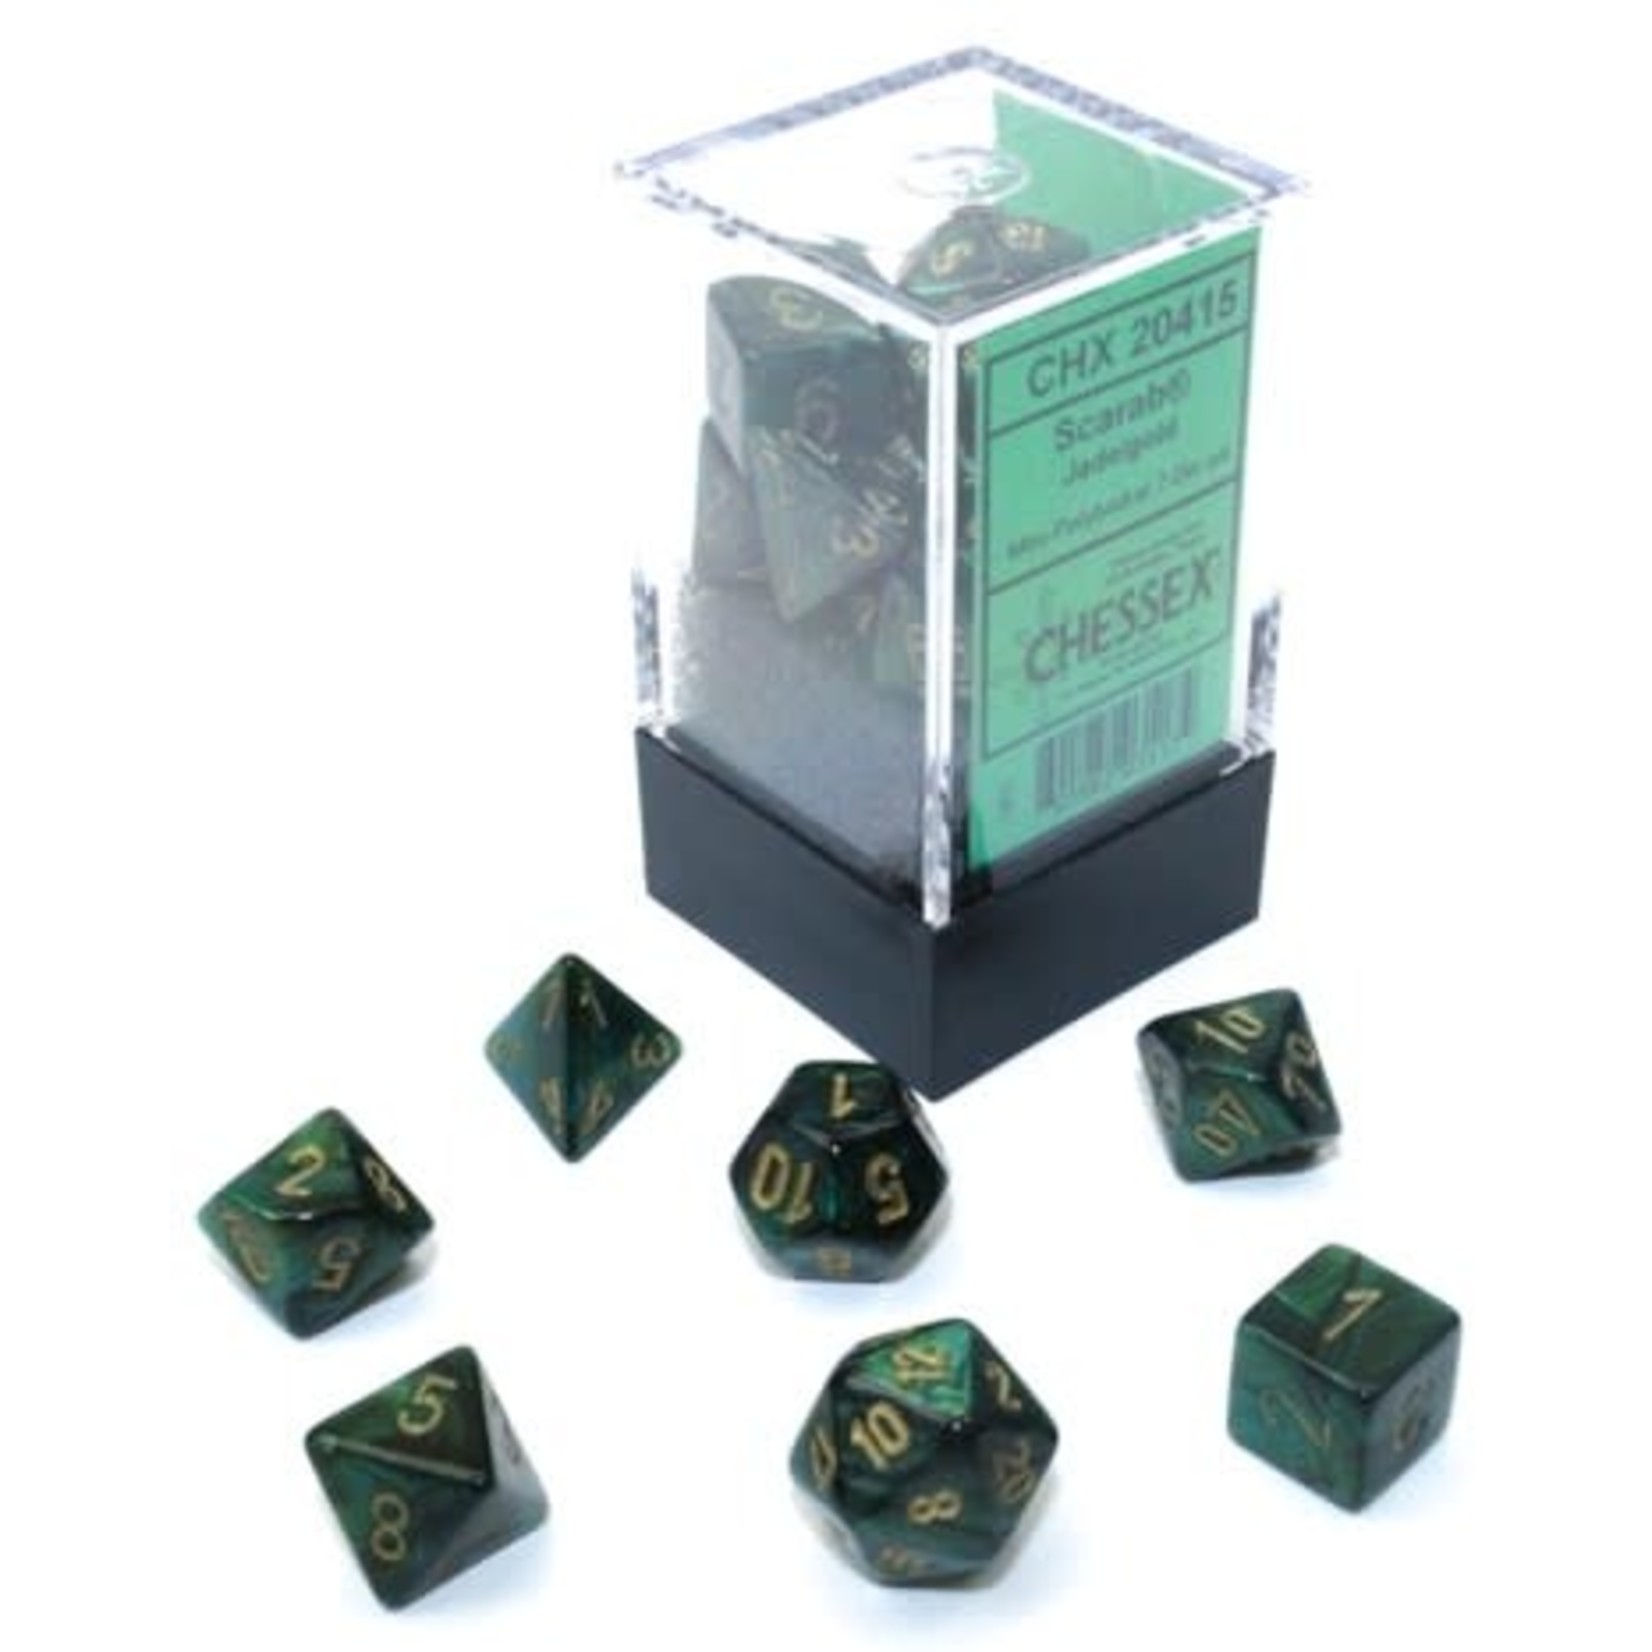 Chessex Chessex Scarab Mini Jade with Gold Polyhedral 7 die set